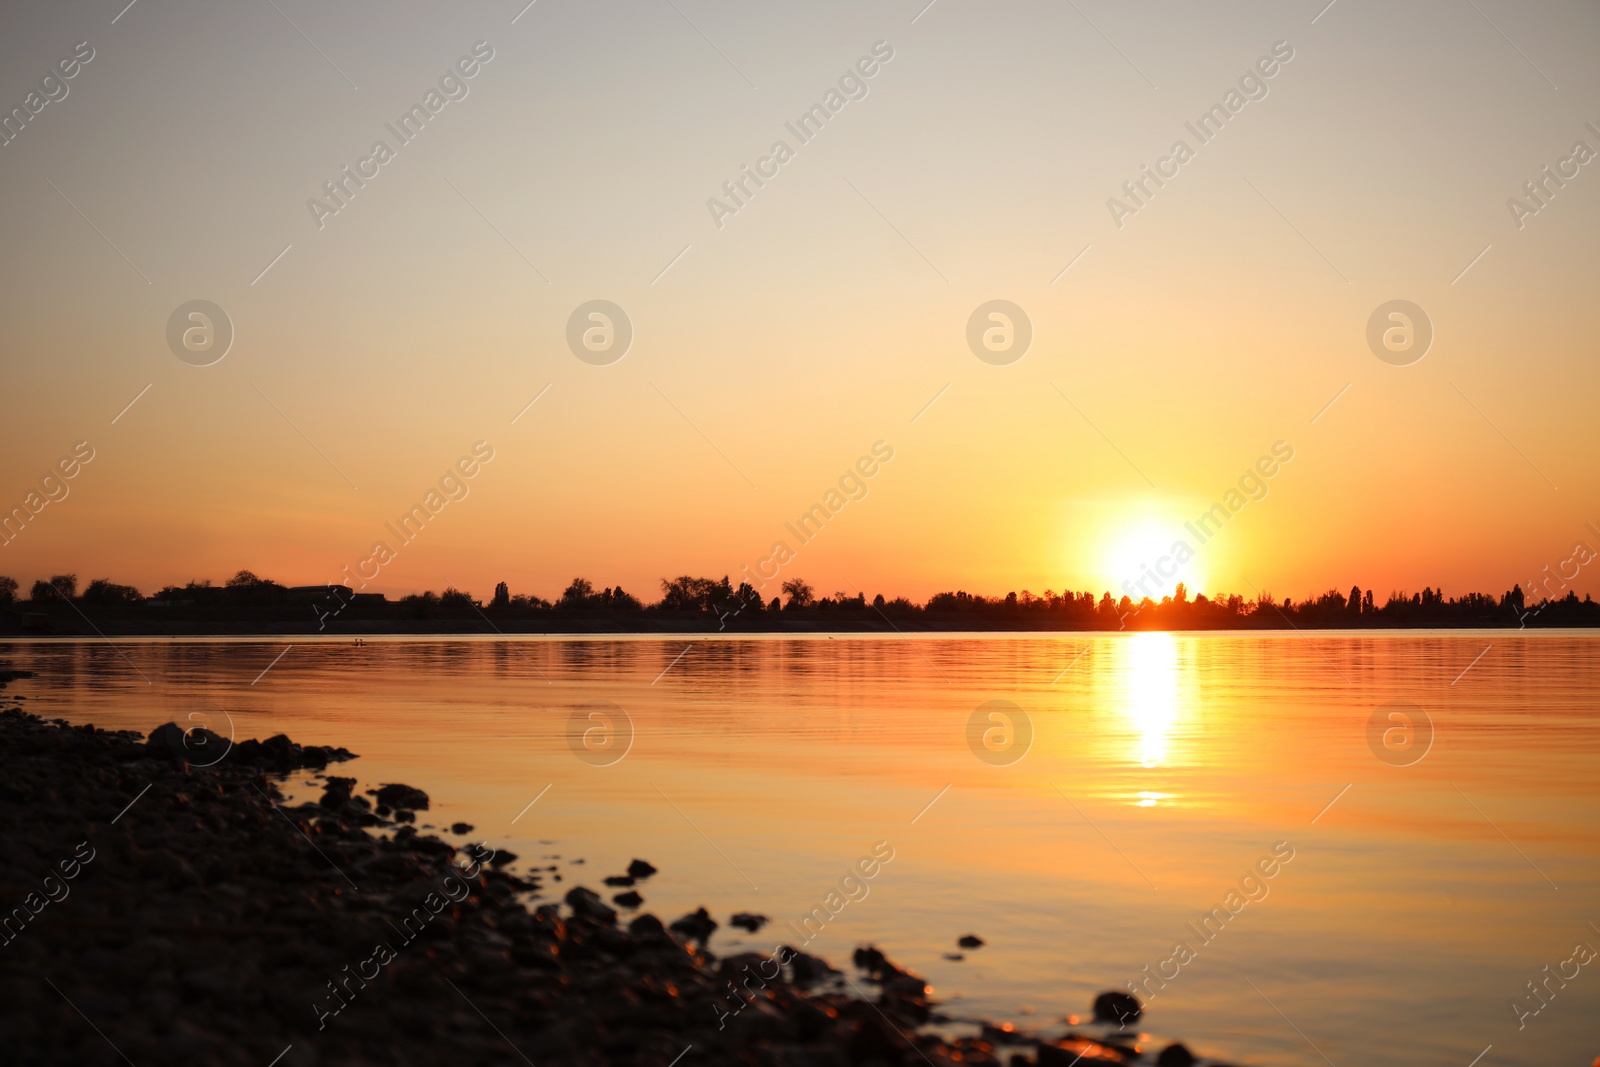 Photo of Picturesque view of rocky beach at sunset